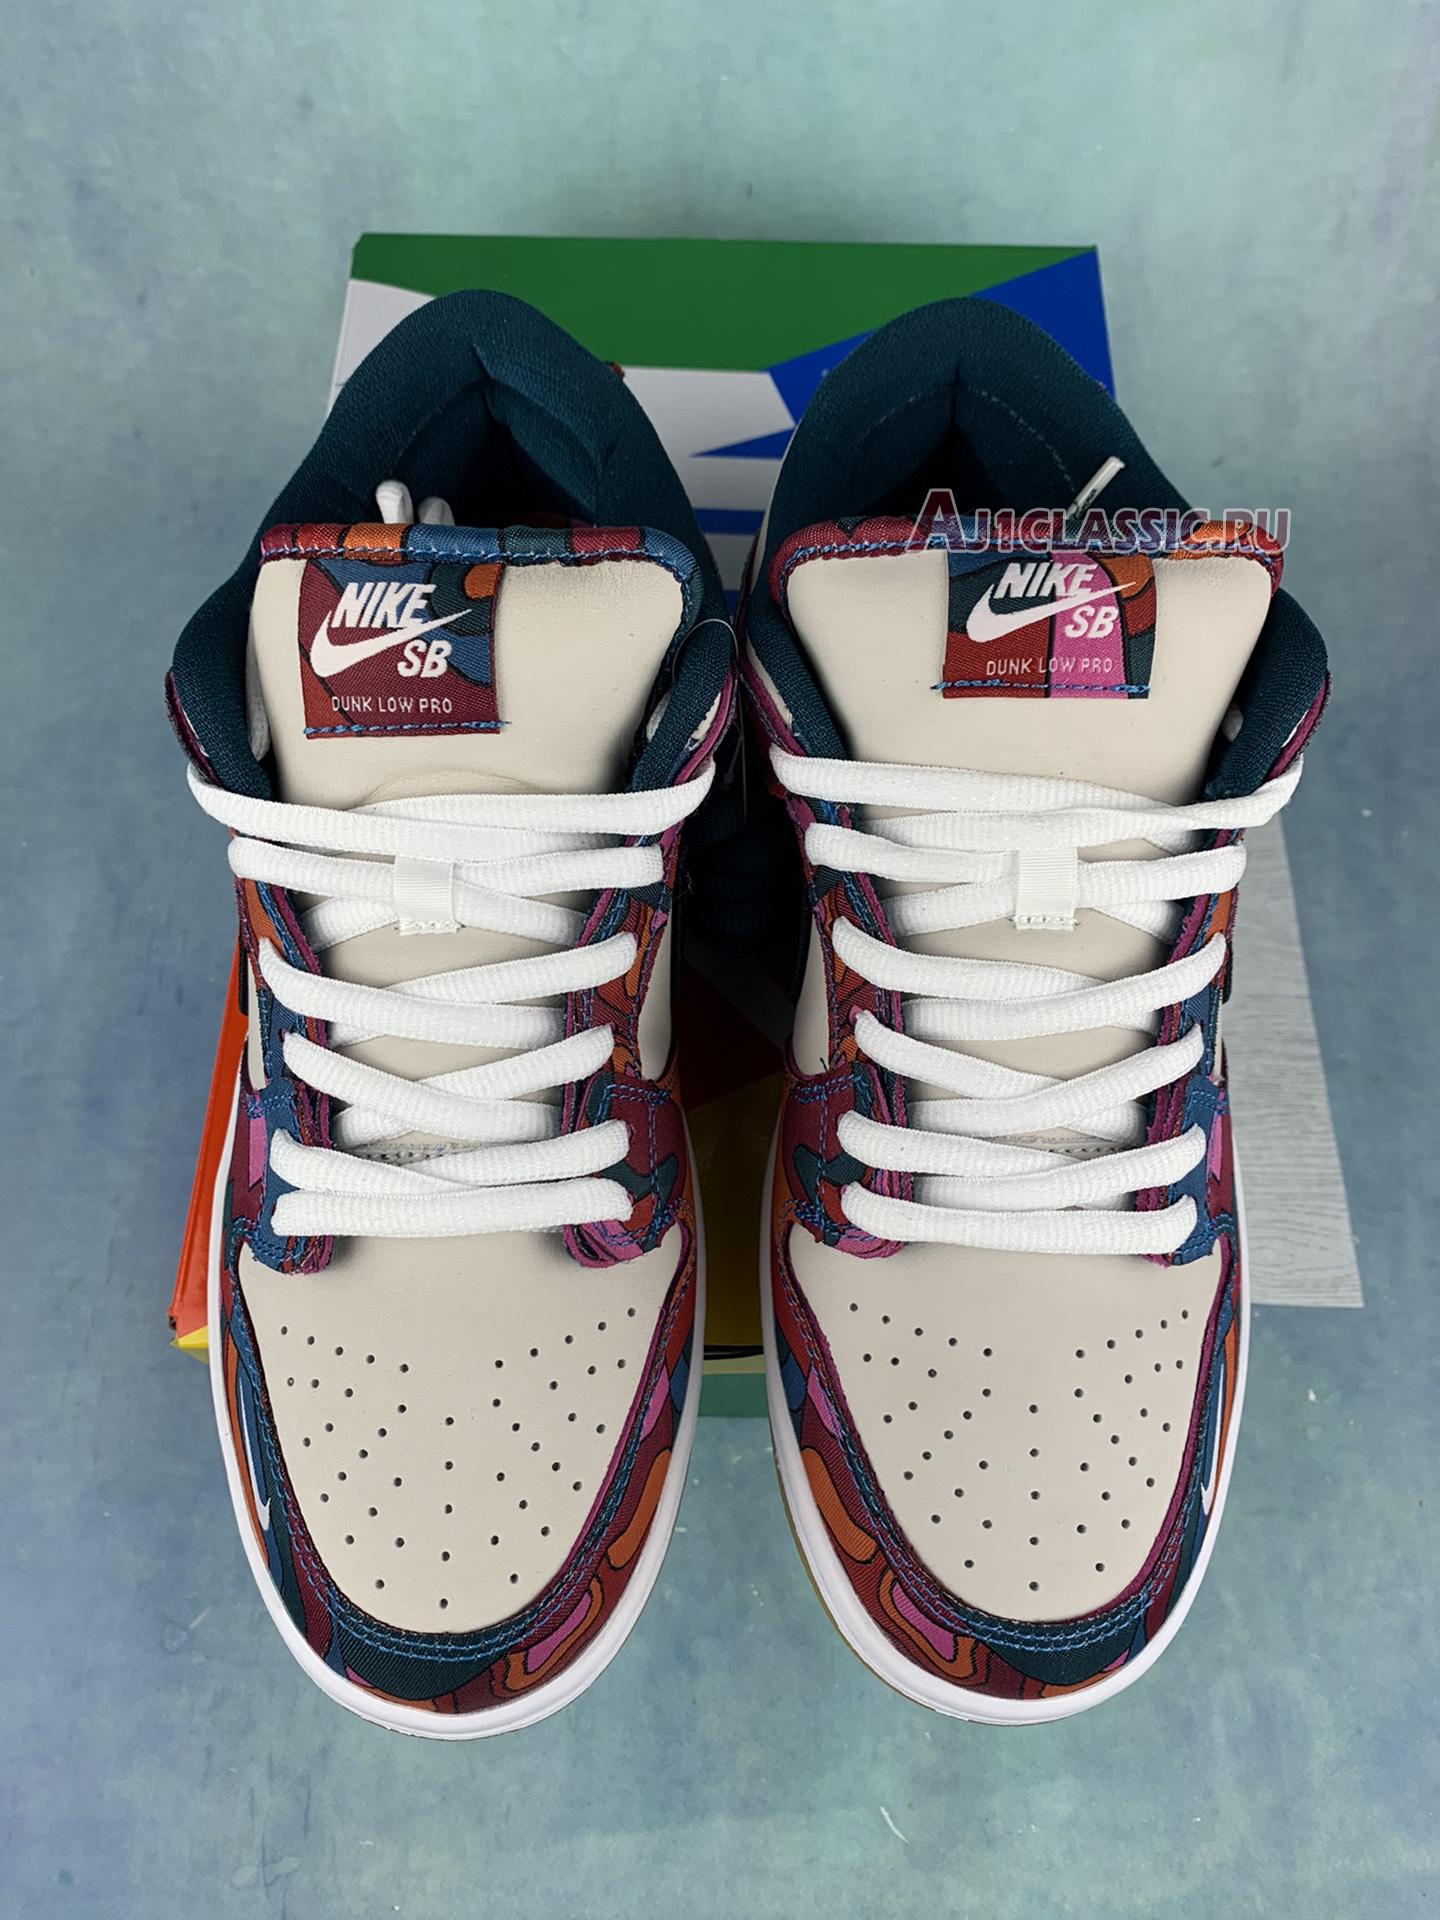 Parra x Nike Dunk Low Pro SB "Abstract Art" DH7695-600